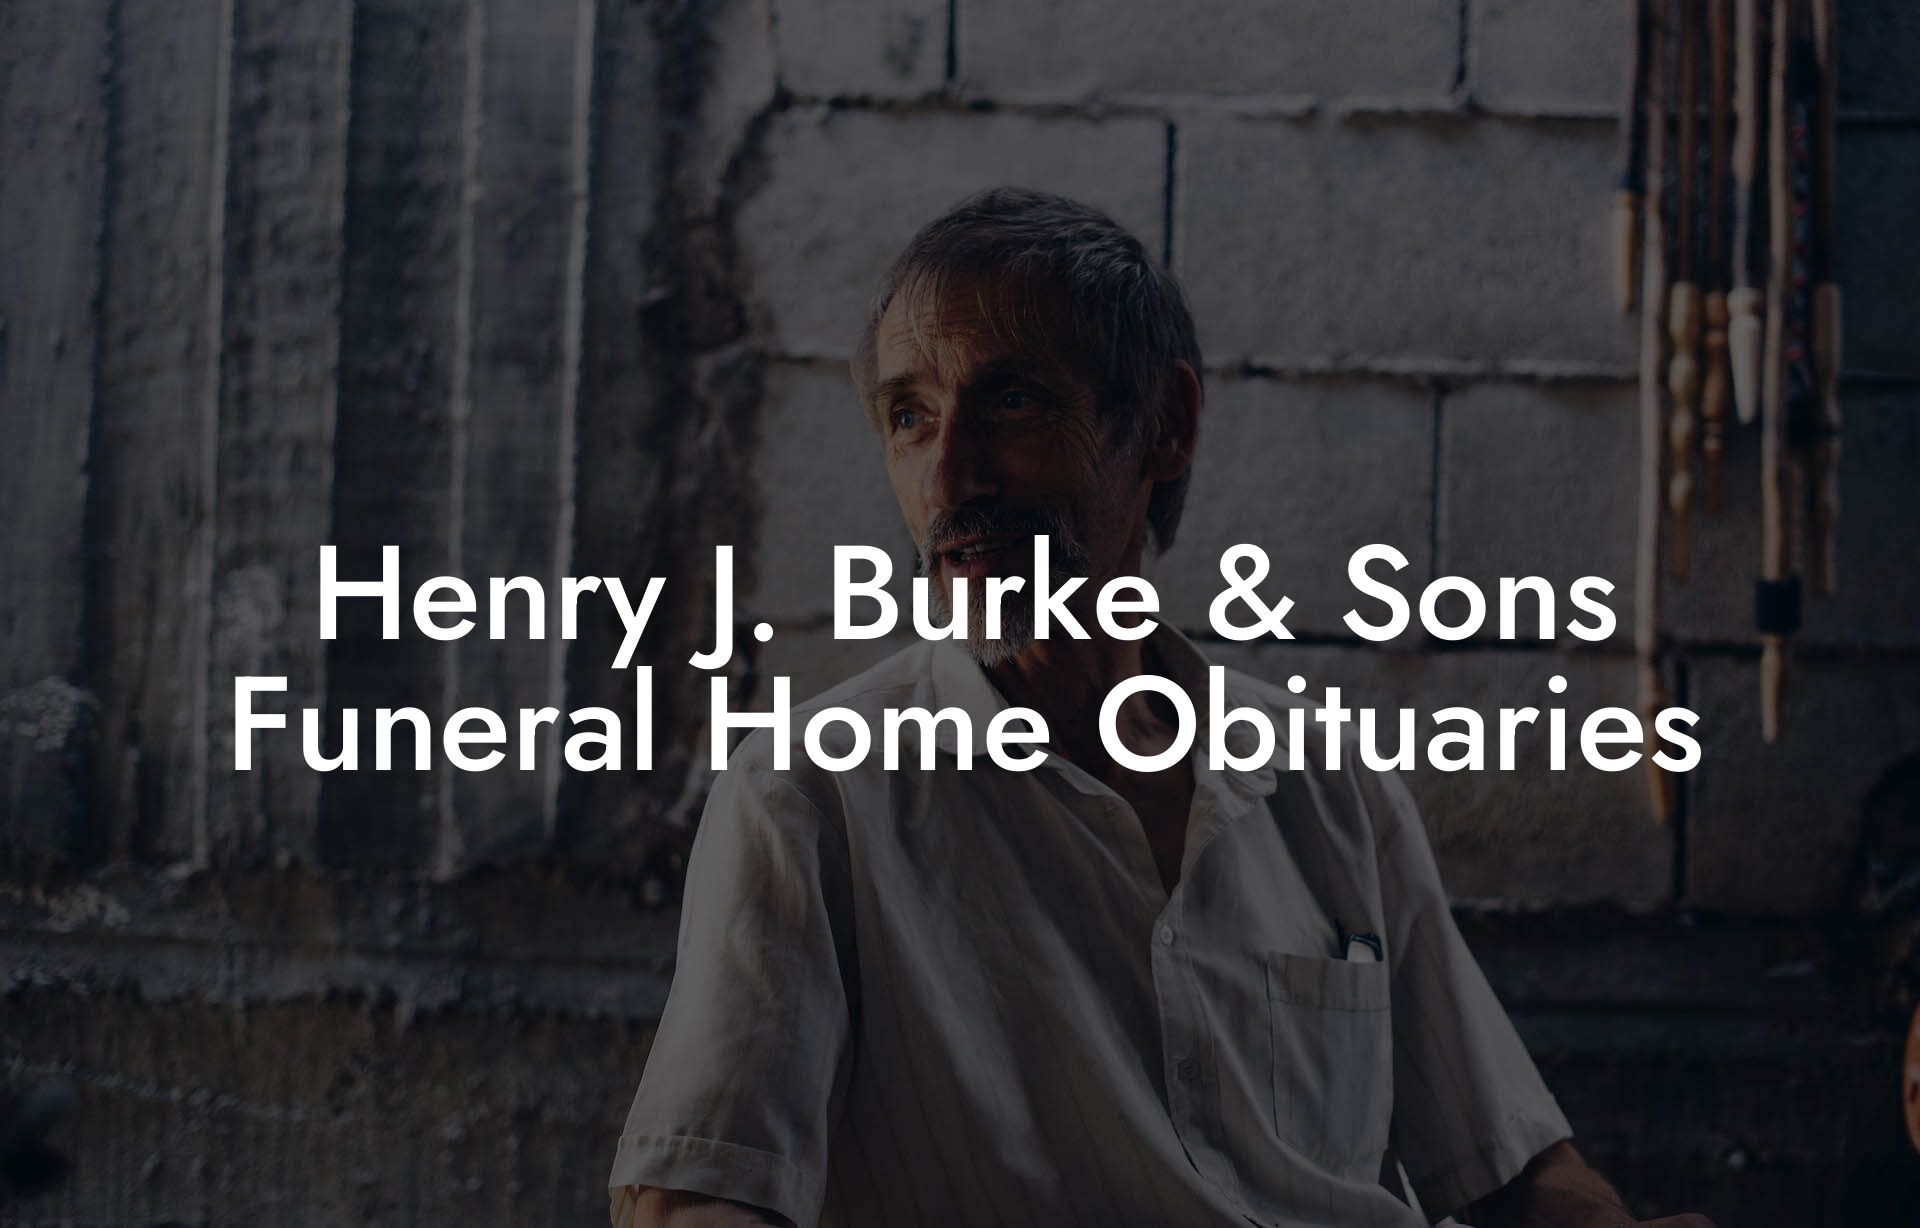 Henry J. Burke & Sons Funeral Home Obituaries